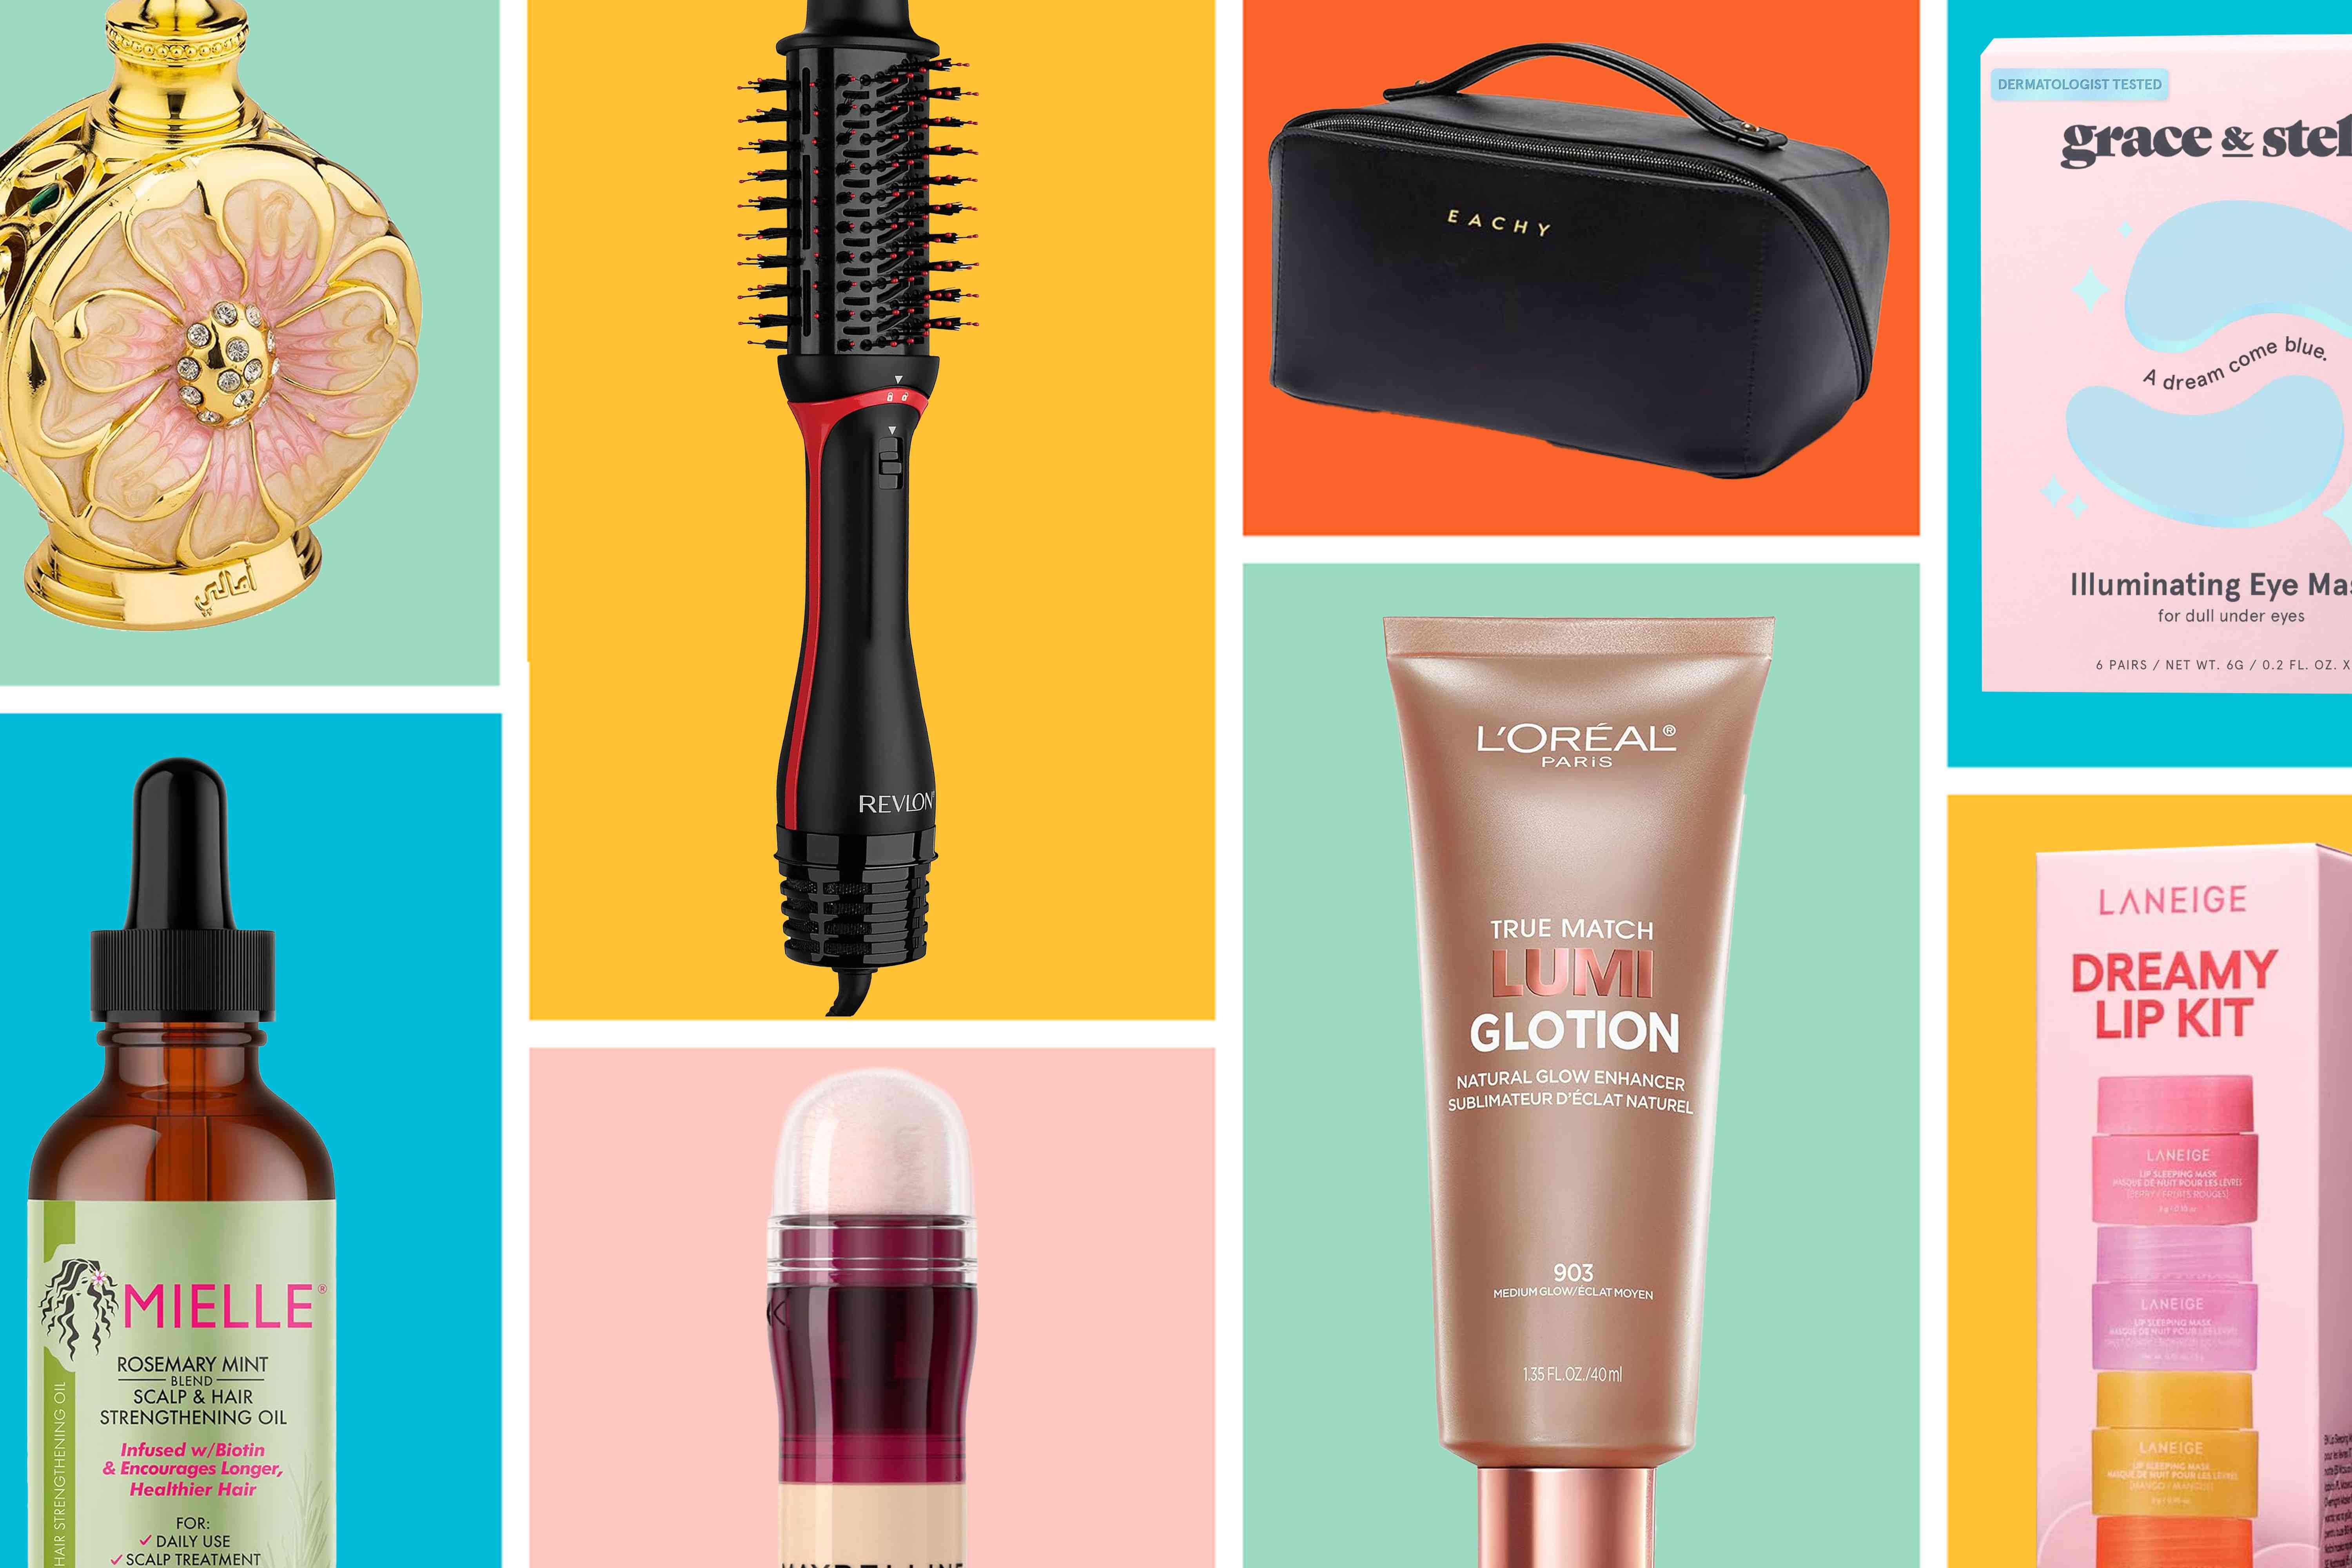 15 Beauty Products Amazon Shoppers Are Hoping to Score for Mother’s Day This Year — Starting at $5